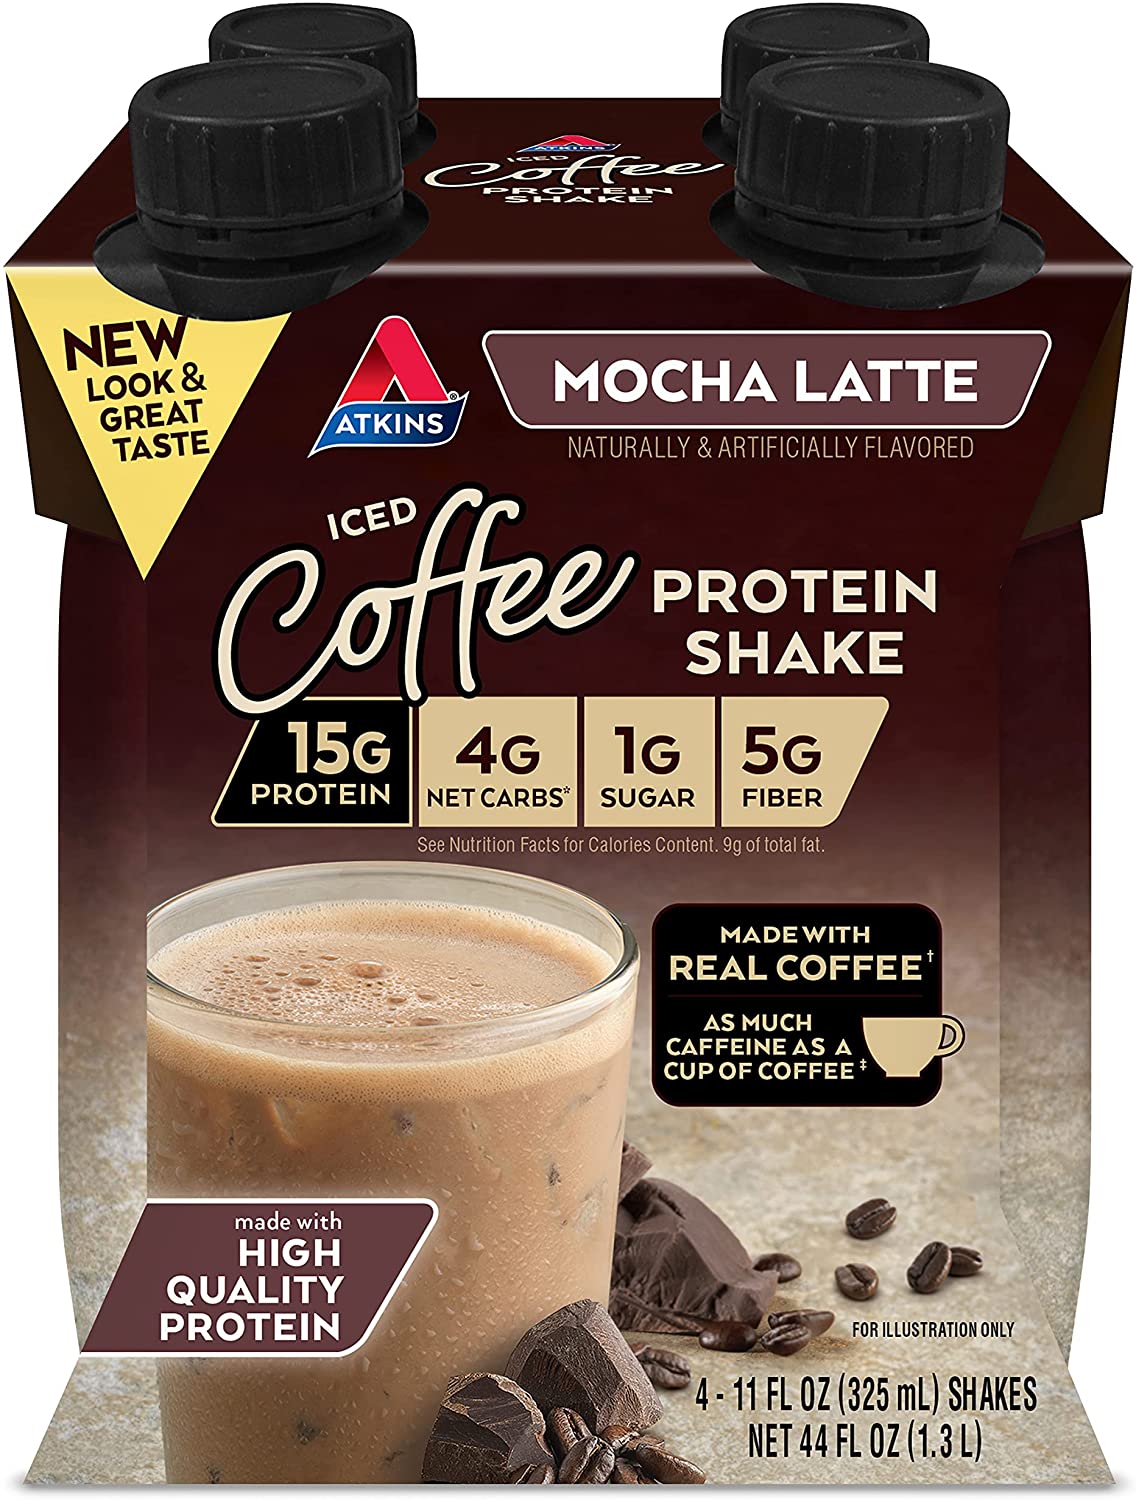 4-Ct 11-Oz Atkins Iced Coffee Protein Shake (Mocha Latte) $4.05 w/ S&S + Free Shipping w/ Prime or on $25+